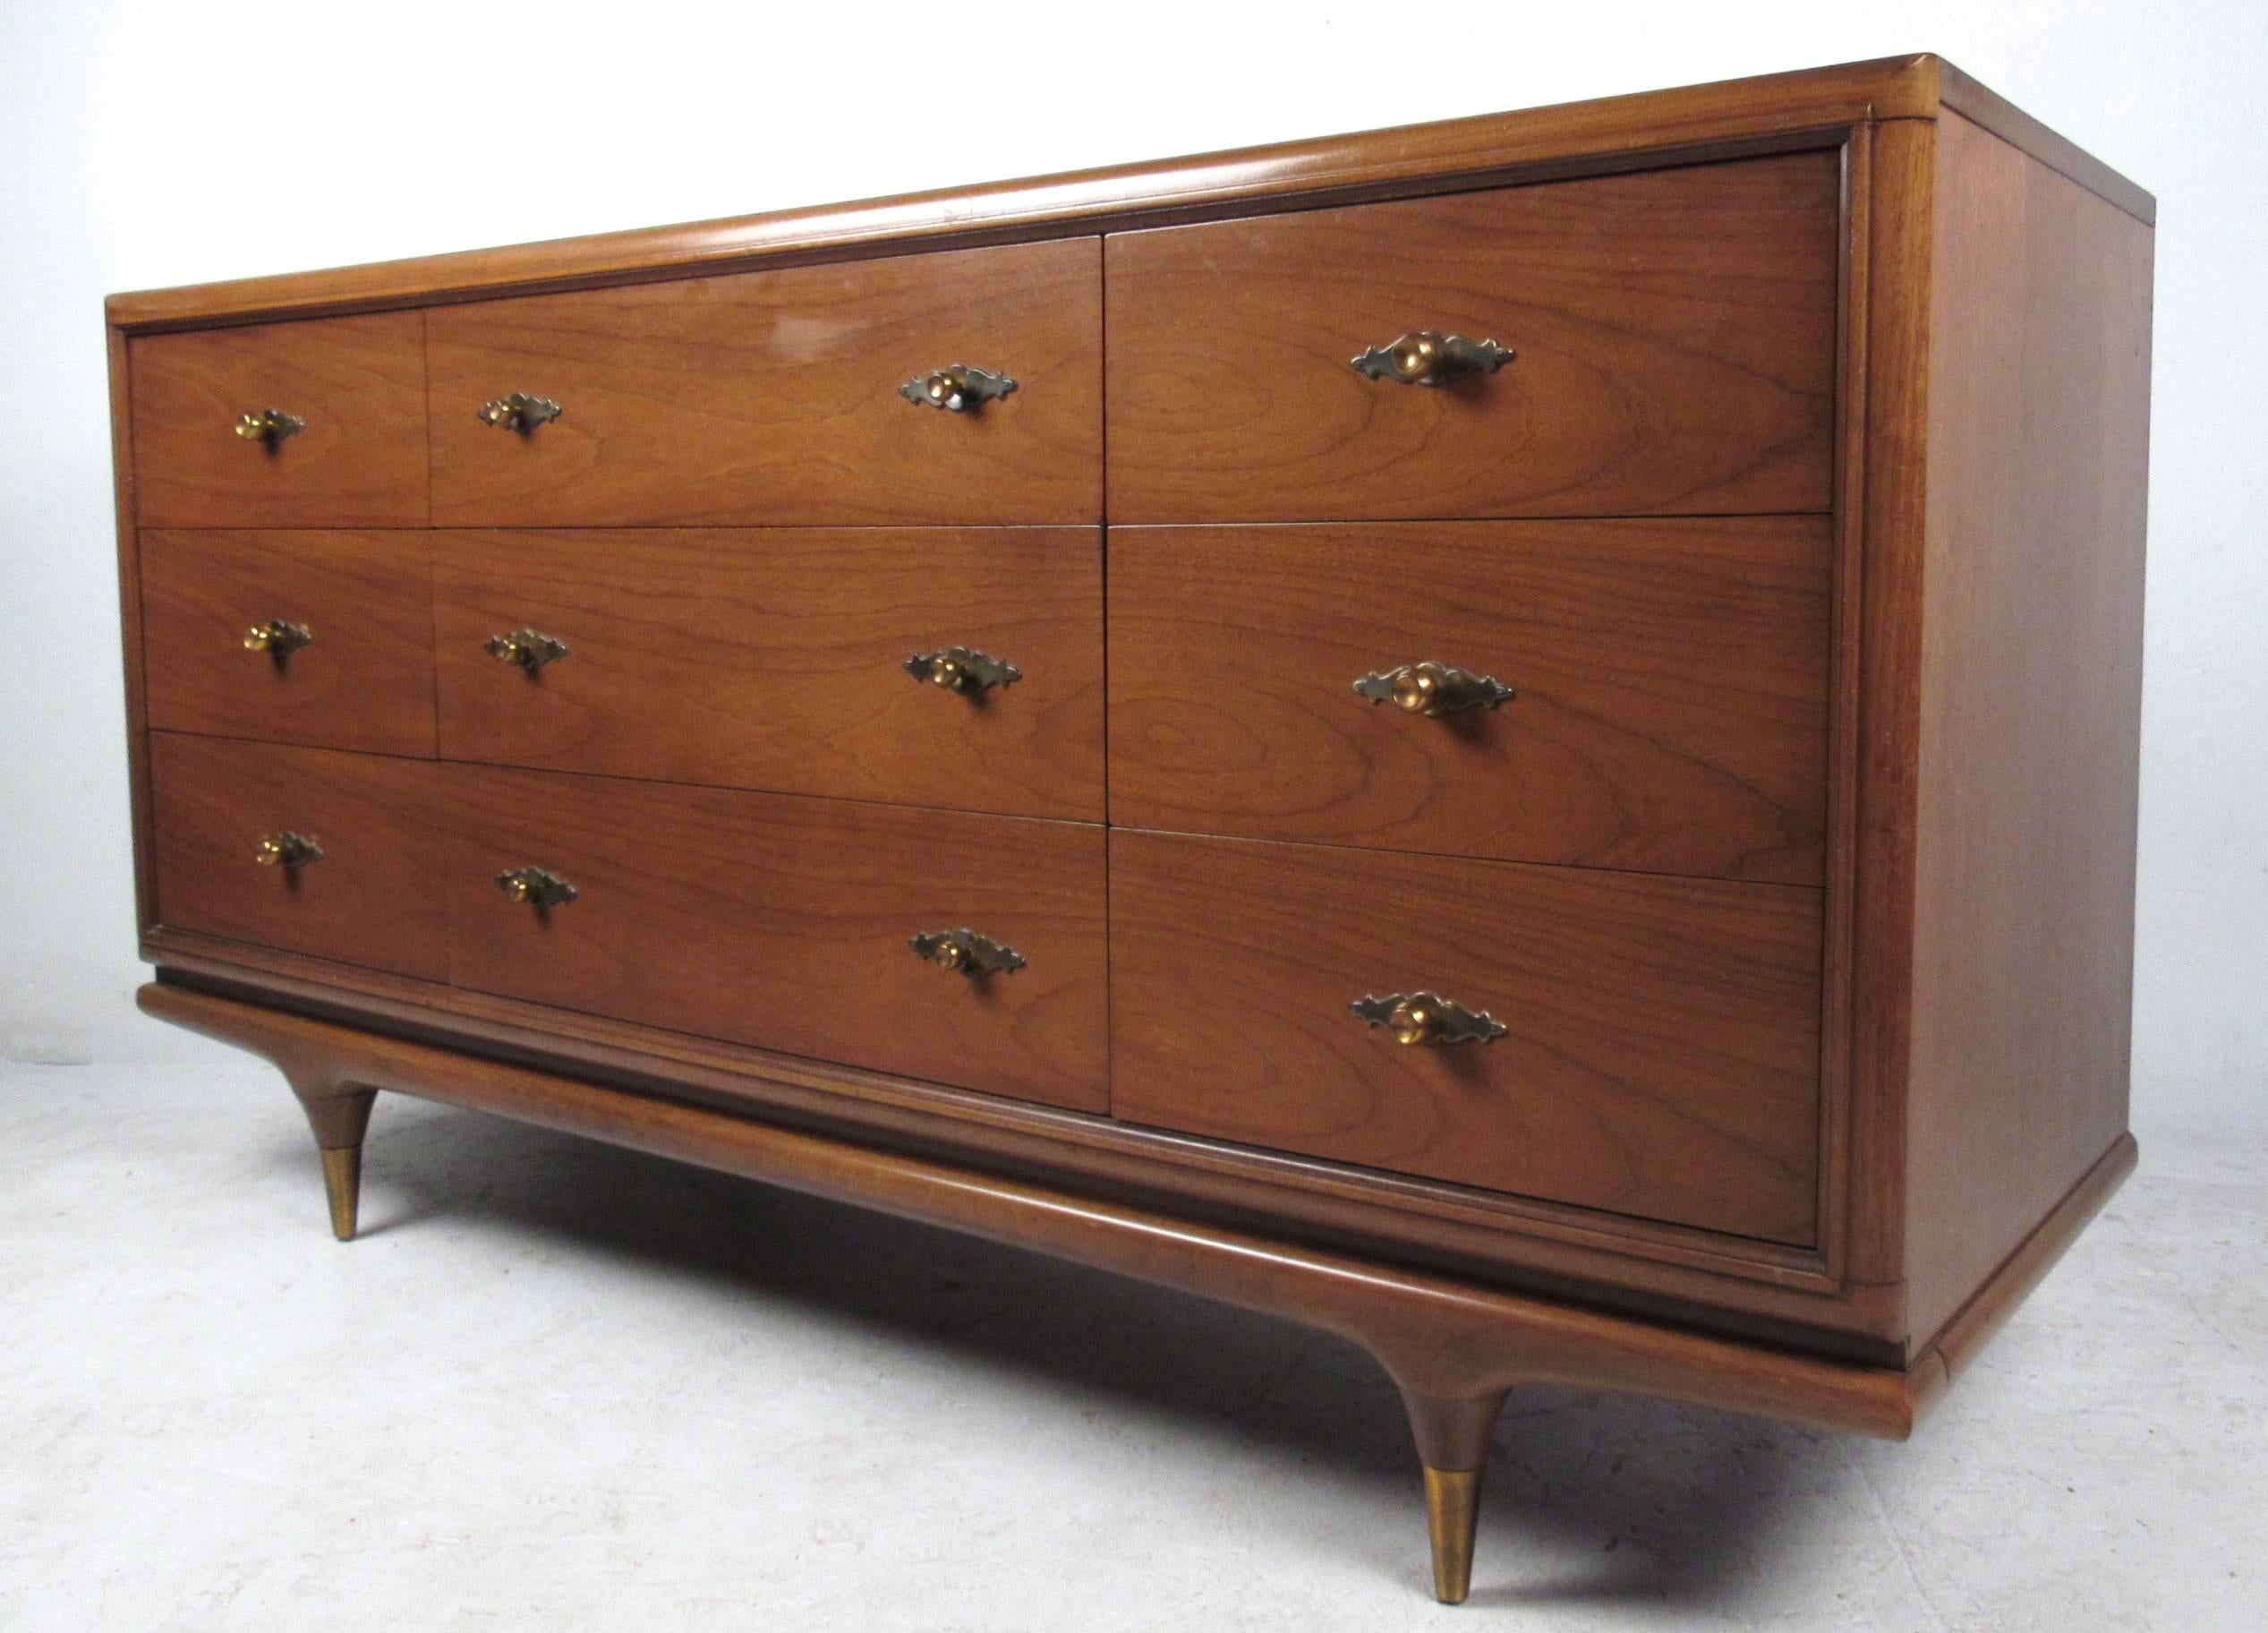 This beautiful nine drawer walnut dresser features the classic style of the Continental line produced by American manufacturer Kent Coffey. Ornate drawer pulls, tapered legs, and brass tip feet add to the unique appeal of the piece. Please confirm